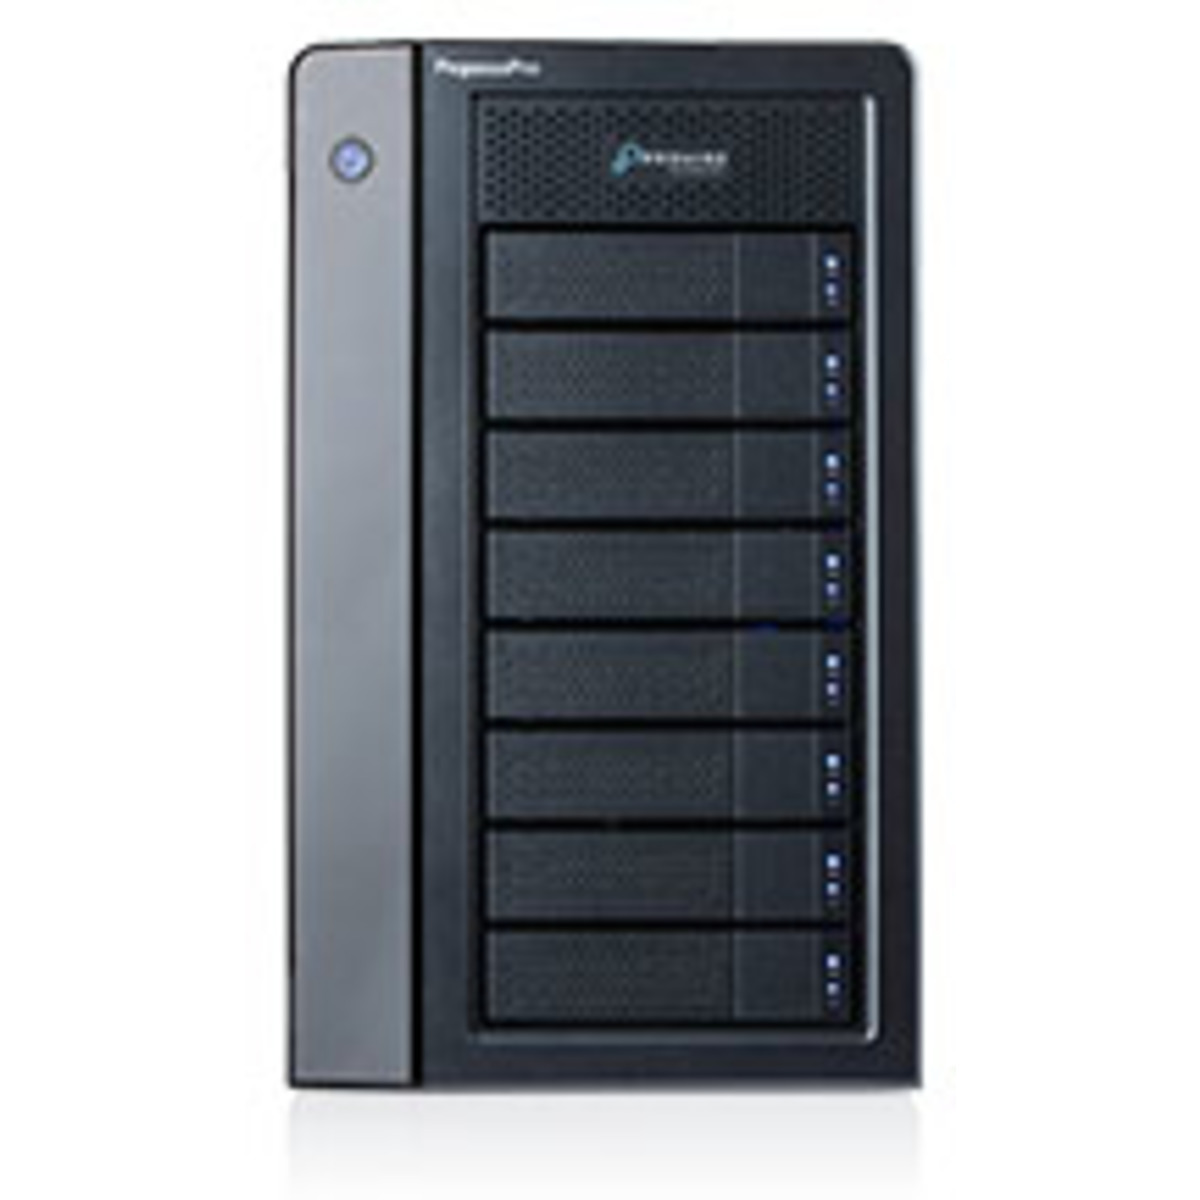 buy $7230 Promise Technology PegasusPro R8 32tb Desktop DAS-NAS - Combo Direct + Network Storage Device 8x4000gb Western Digital Blue WD40EZRZ 3.5 5400rpm SATA 6Gb/s HDD CONSUMER Class Drives Installed - Burn-In Tested - nas headquarters buy network attached storage server device das new raid-5 free shipping usa christmas new year holiday sale PegasusPro R8